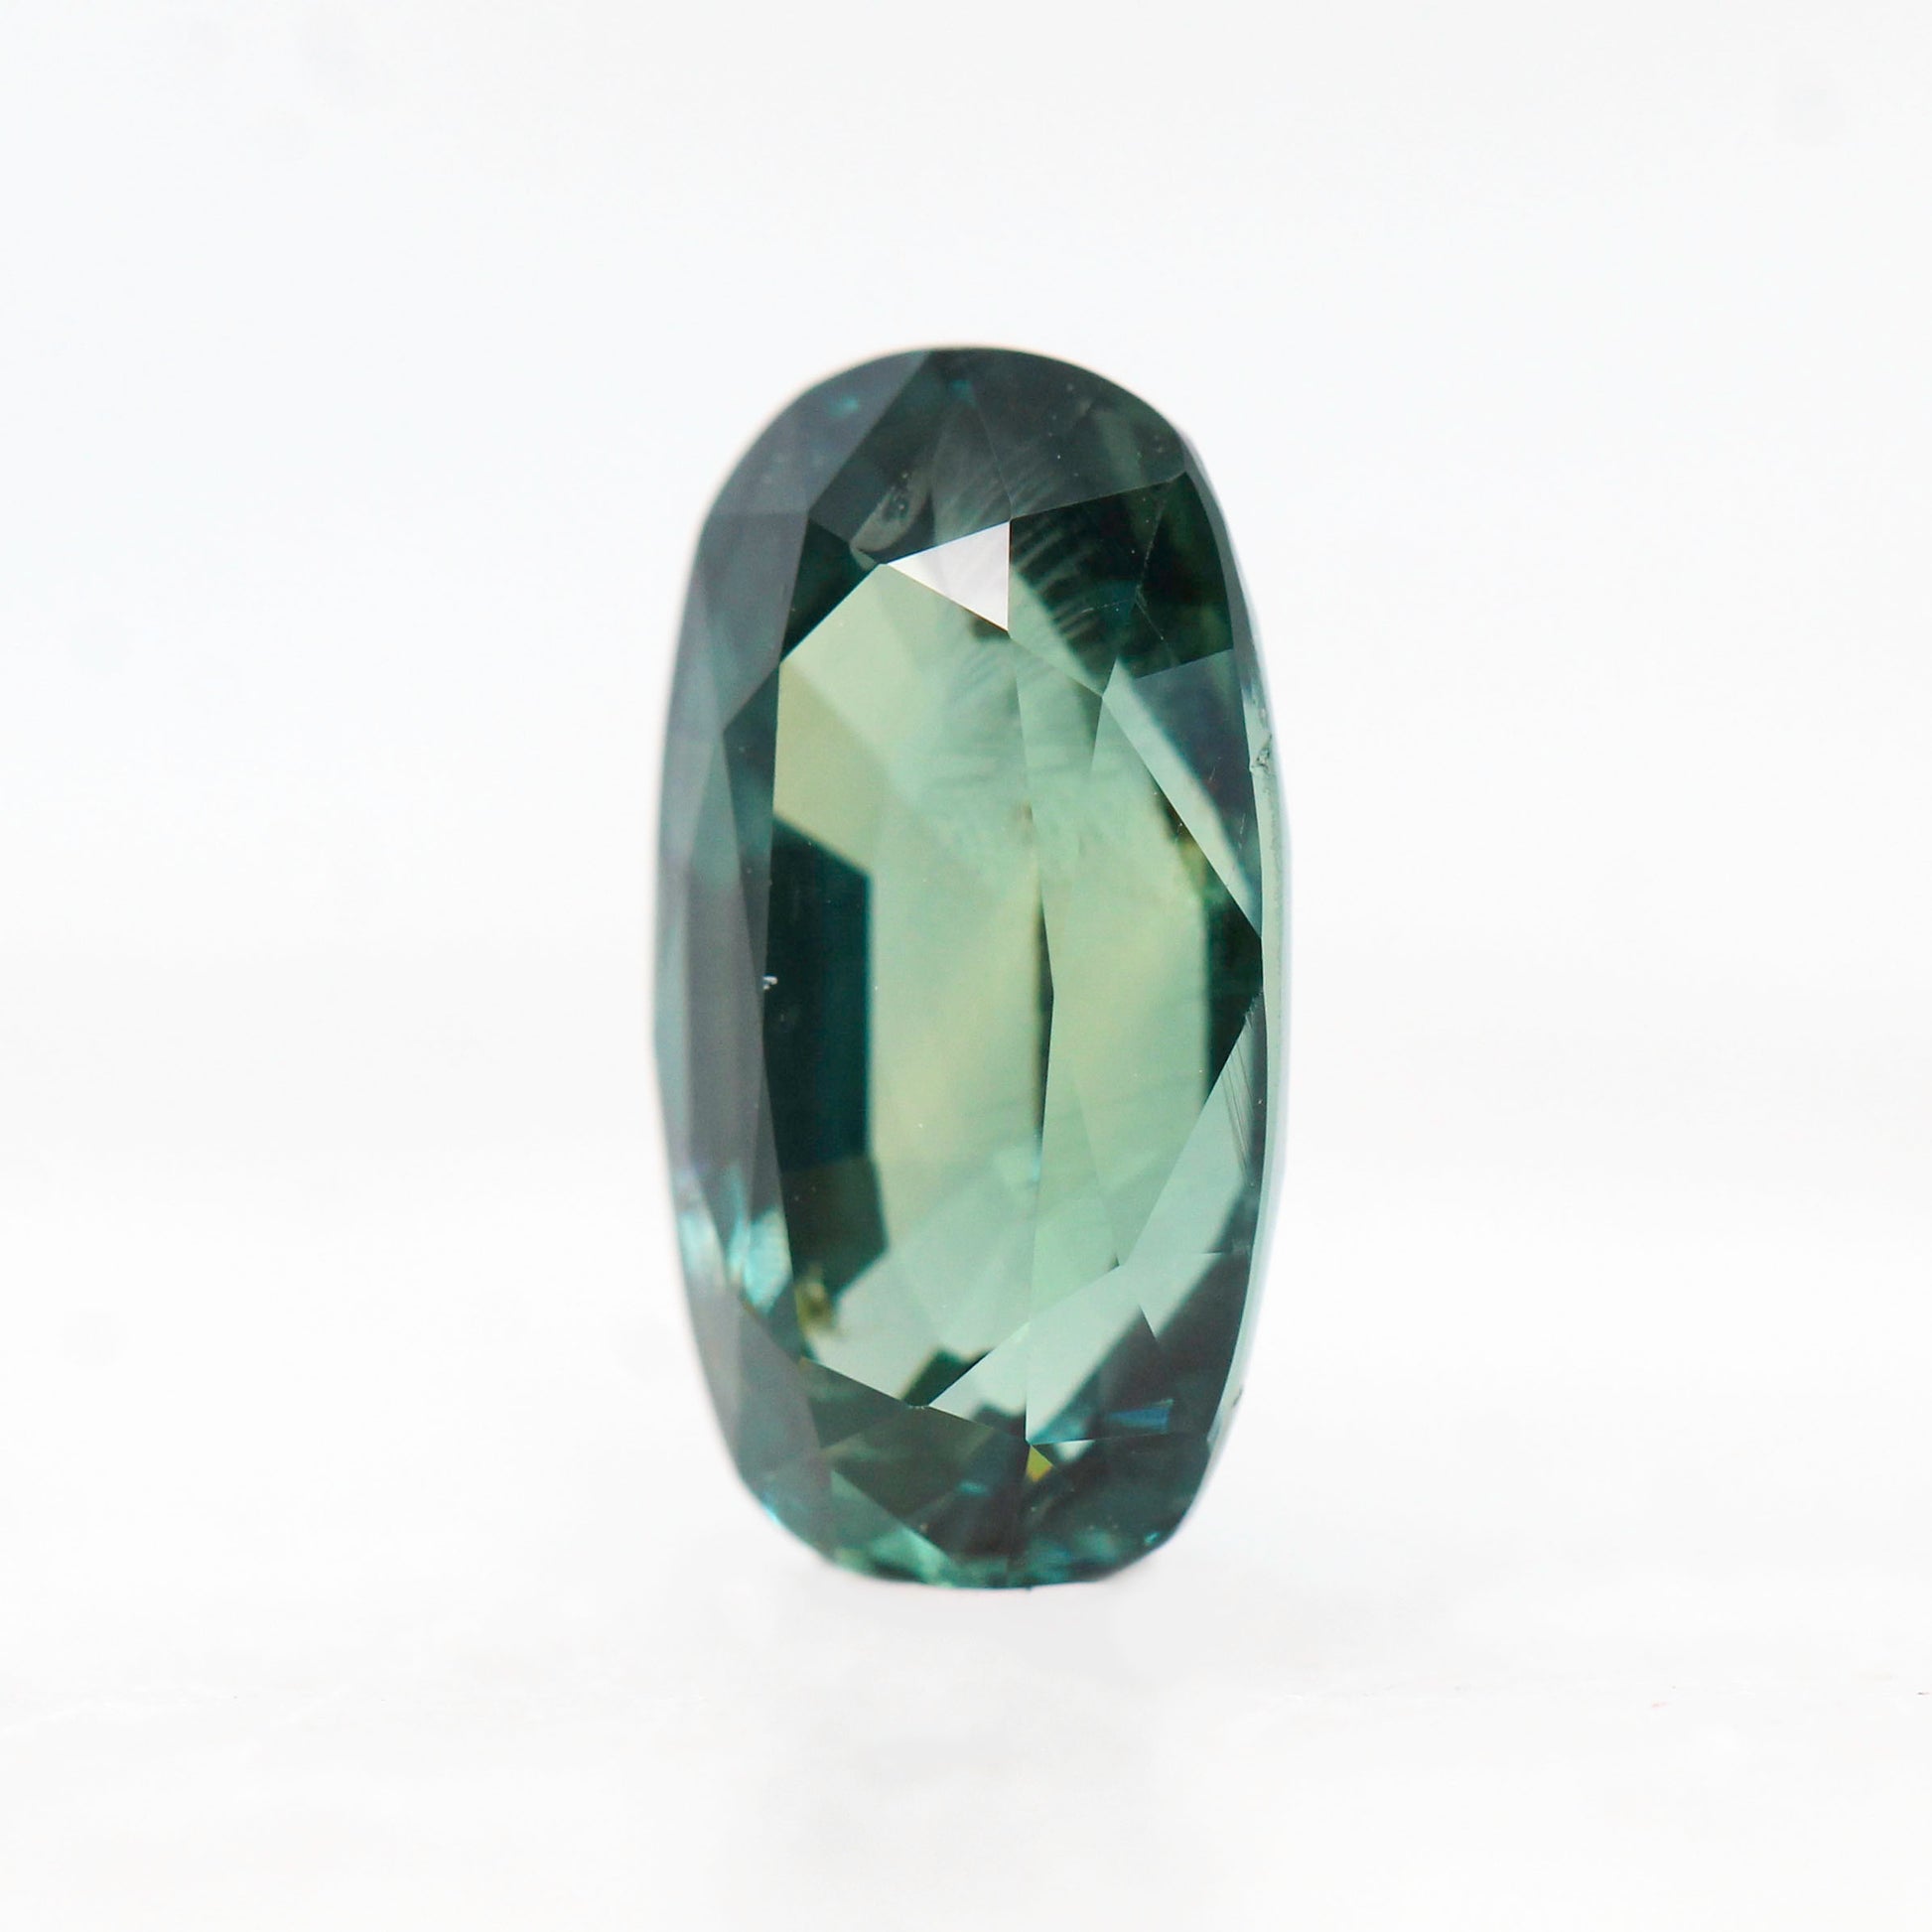 2.80 Carat Teal Elongated Oval Sapphire for Custom Work - Inventory Code TEOS280 - Midwinter Co. Alternative Bridal Rings and Modern Fine Jewelry